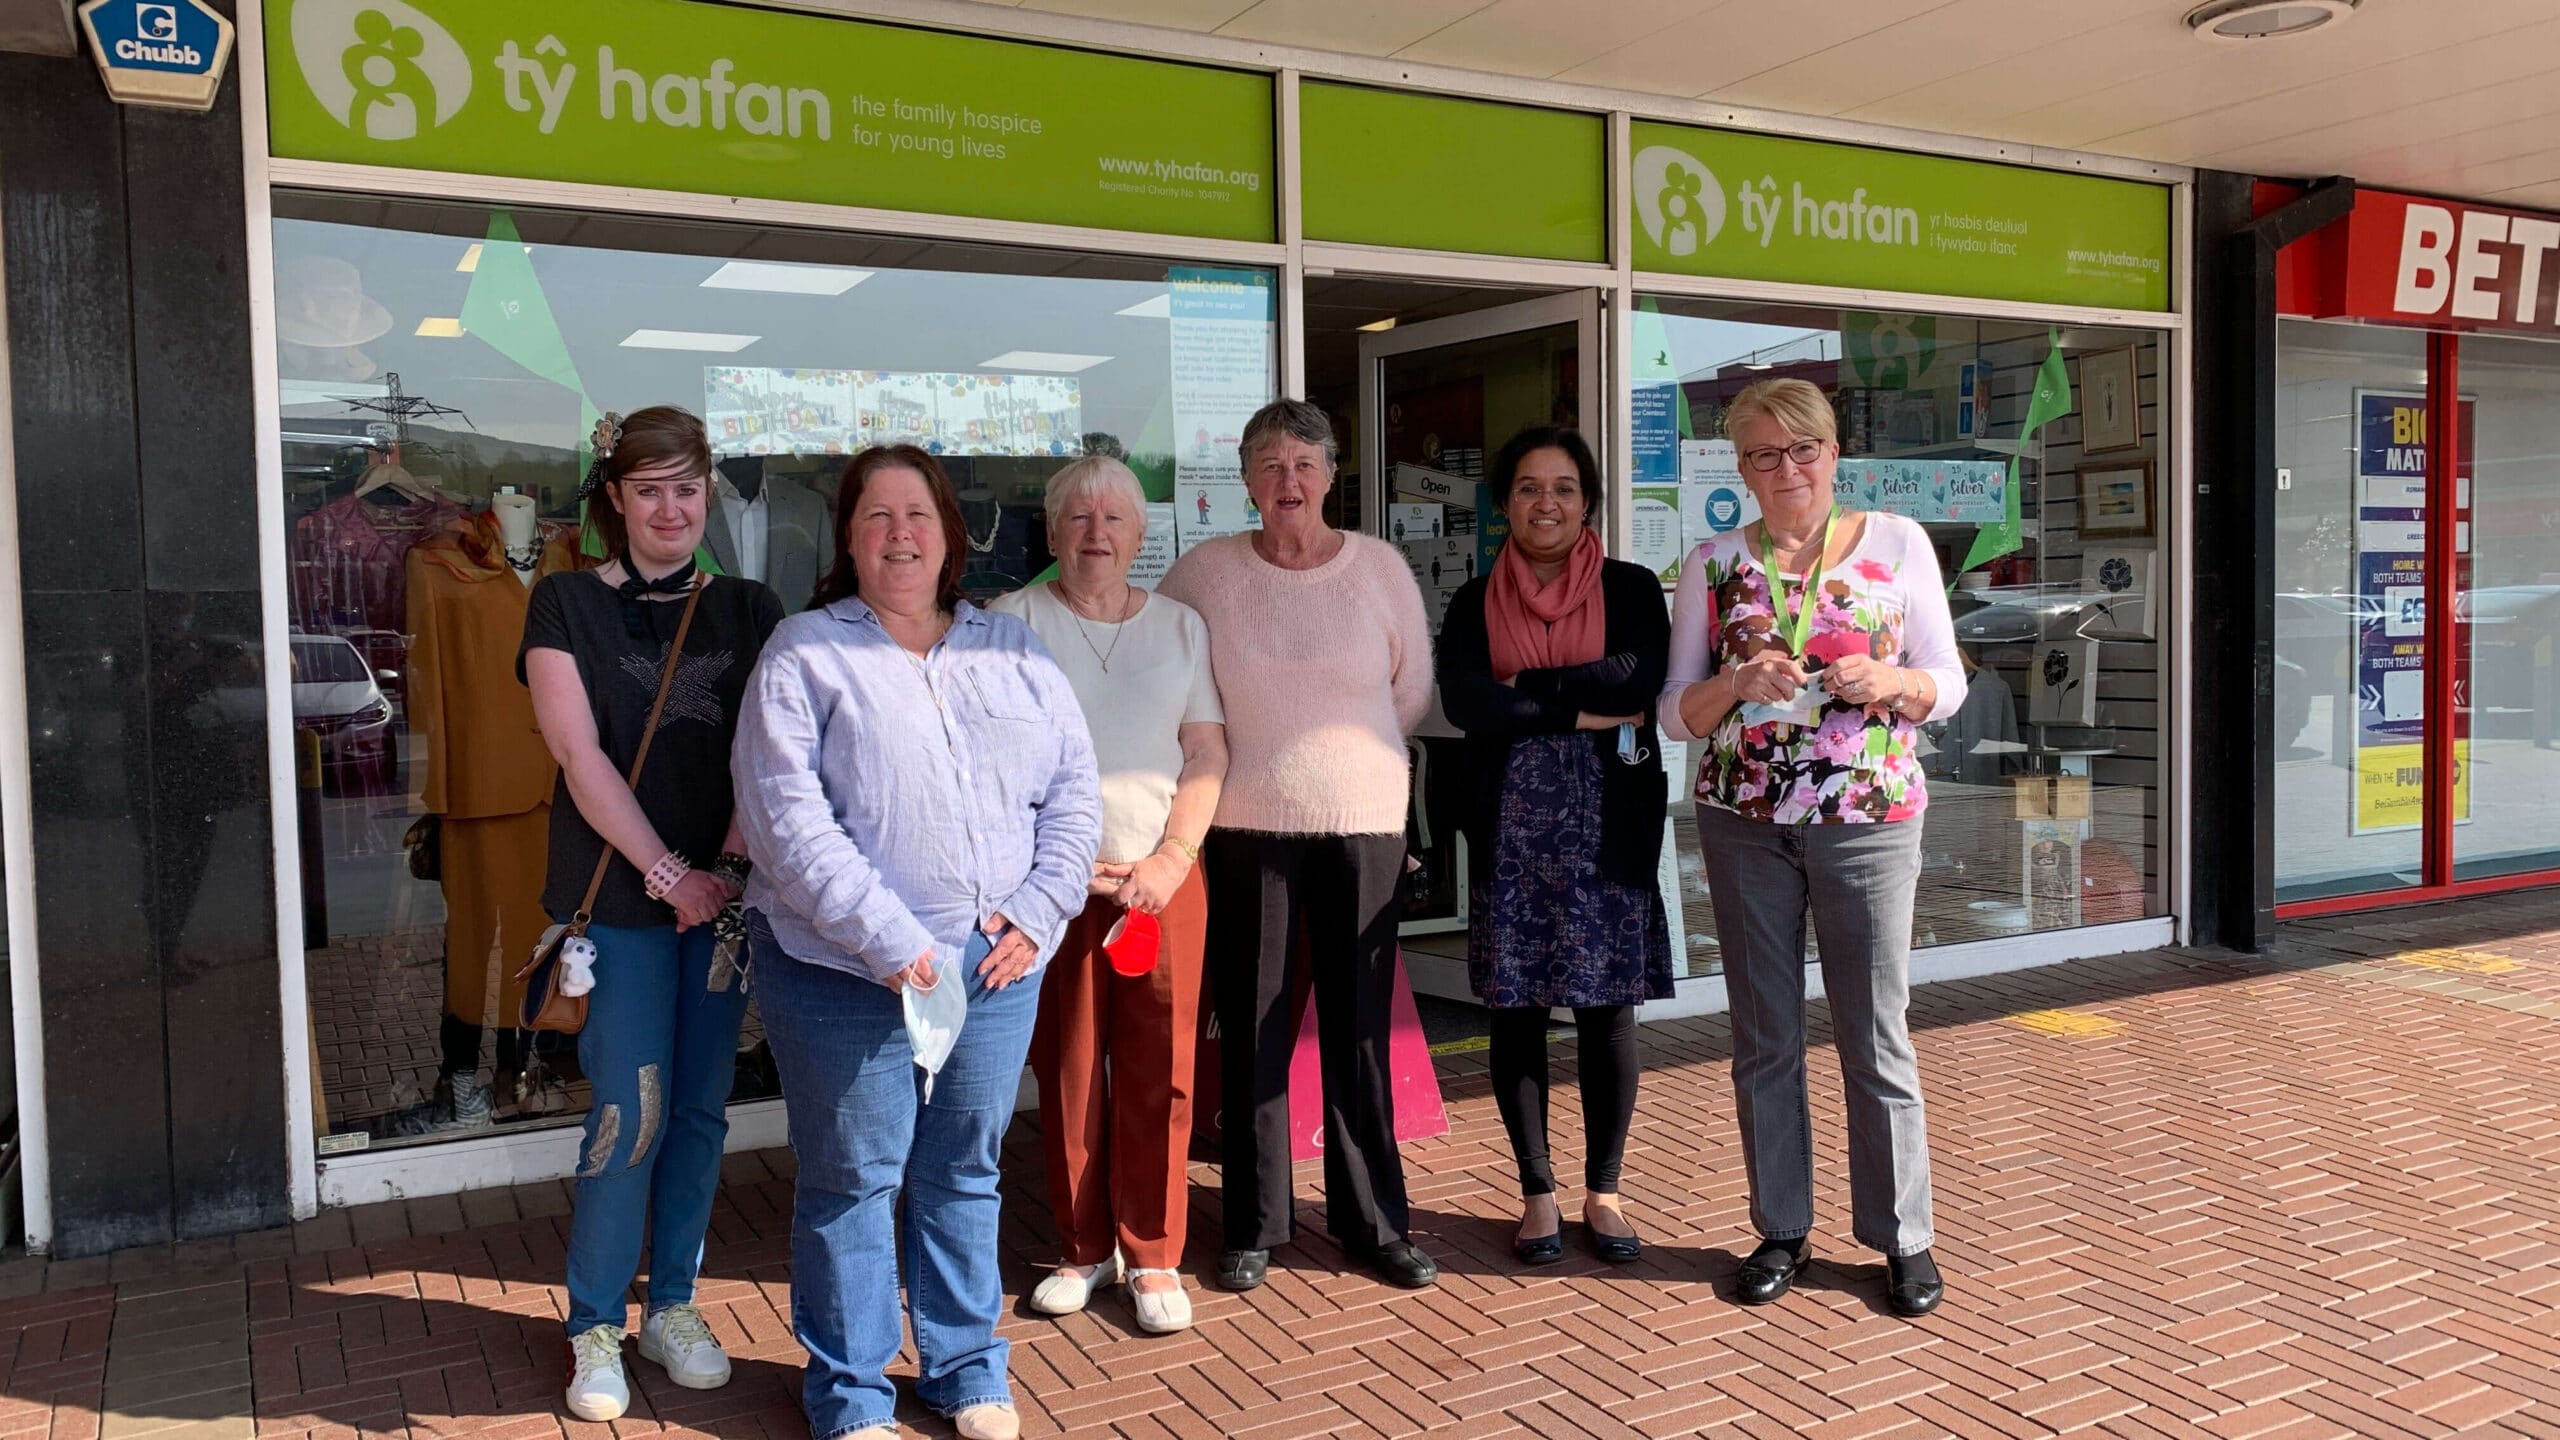 Staff and volunteers stood out the Ty-Hafan shop in Cwmbran